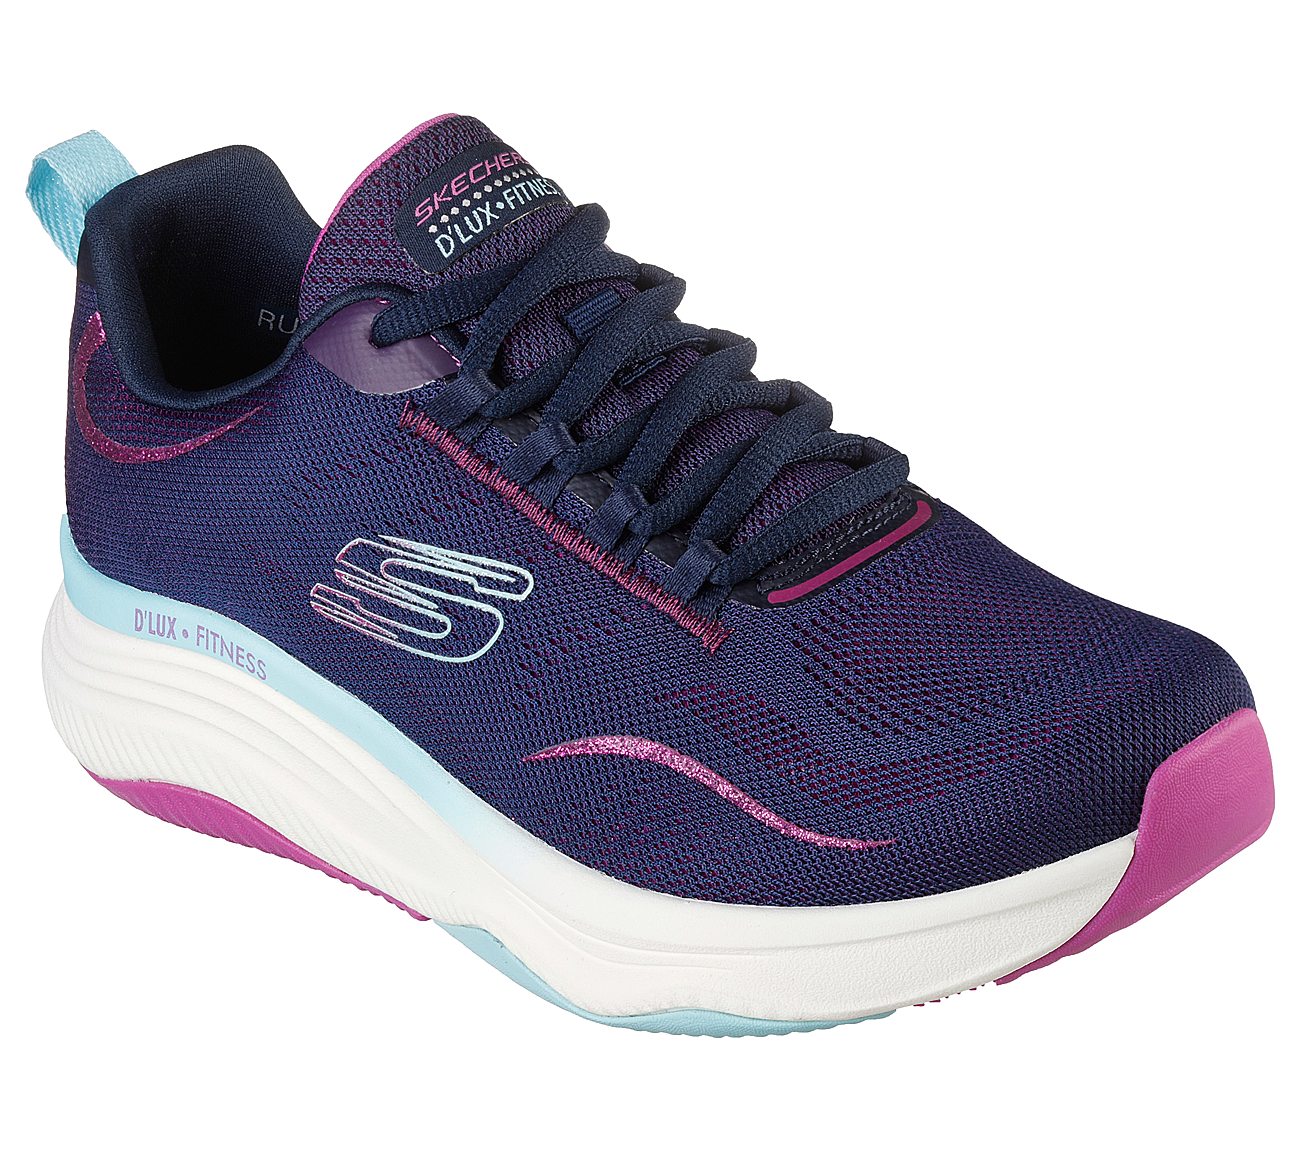 D'LUX FITNESS, NAVY/MULTI Footwear Lateral View